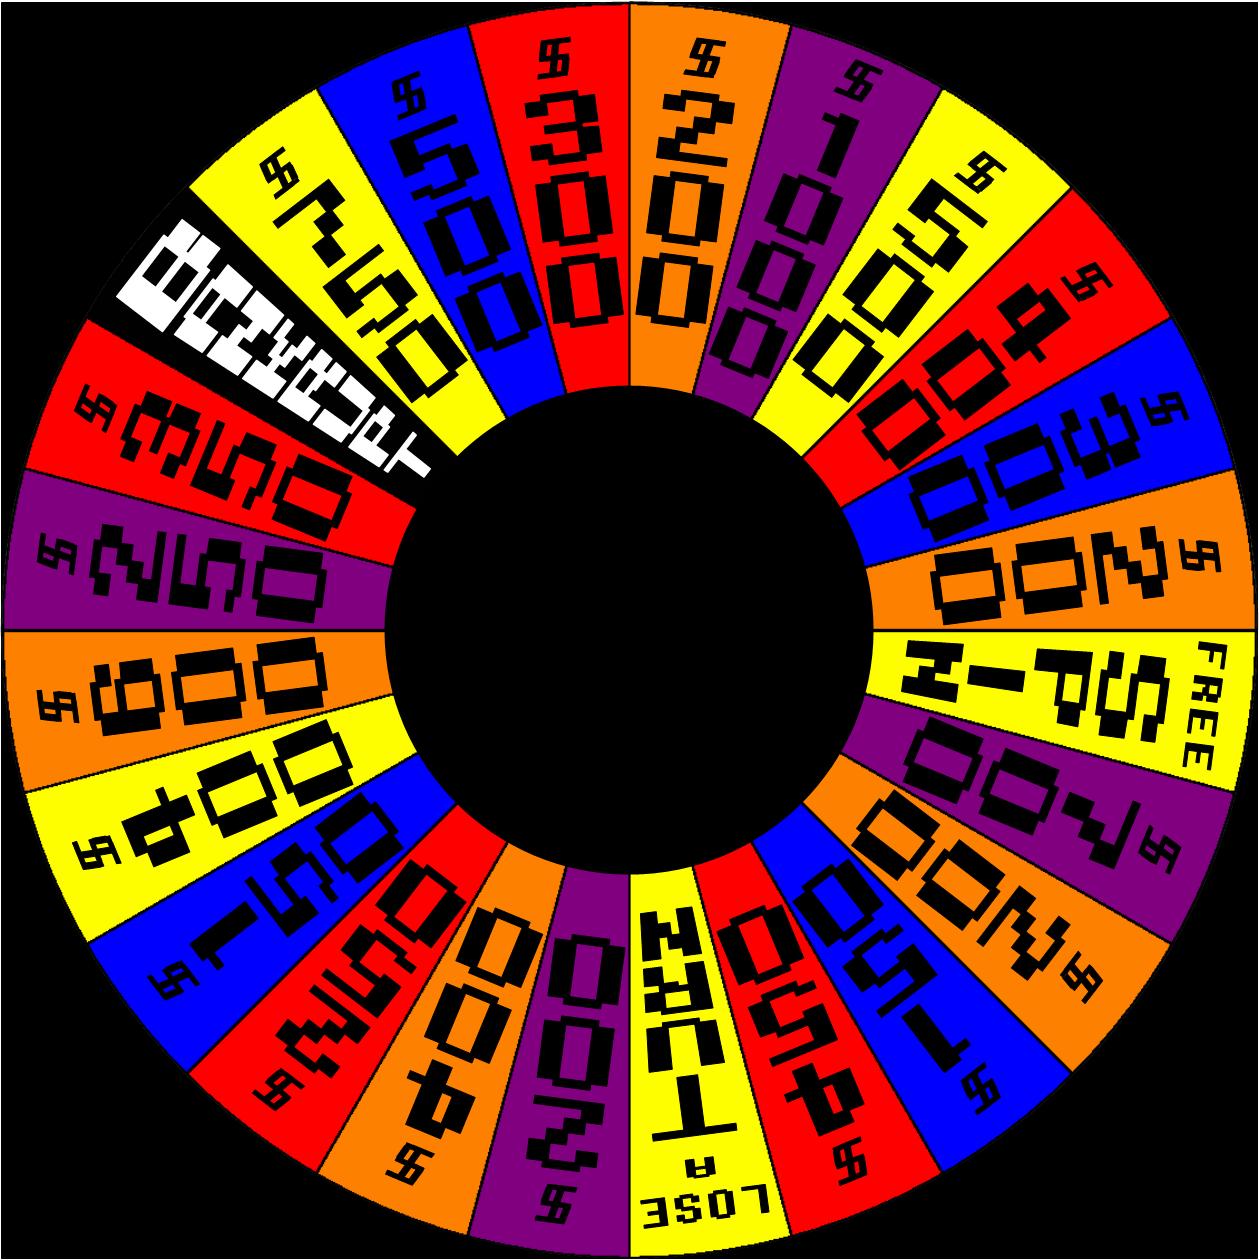 VGAWheel Layout 2 by germanname